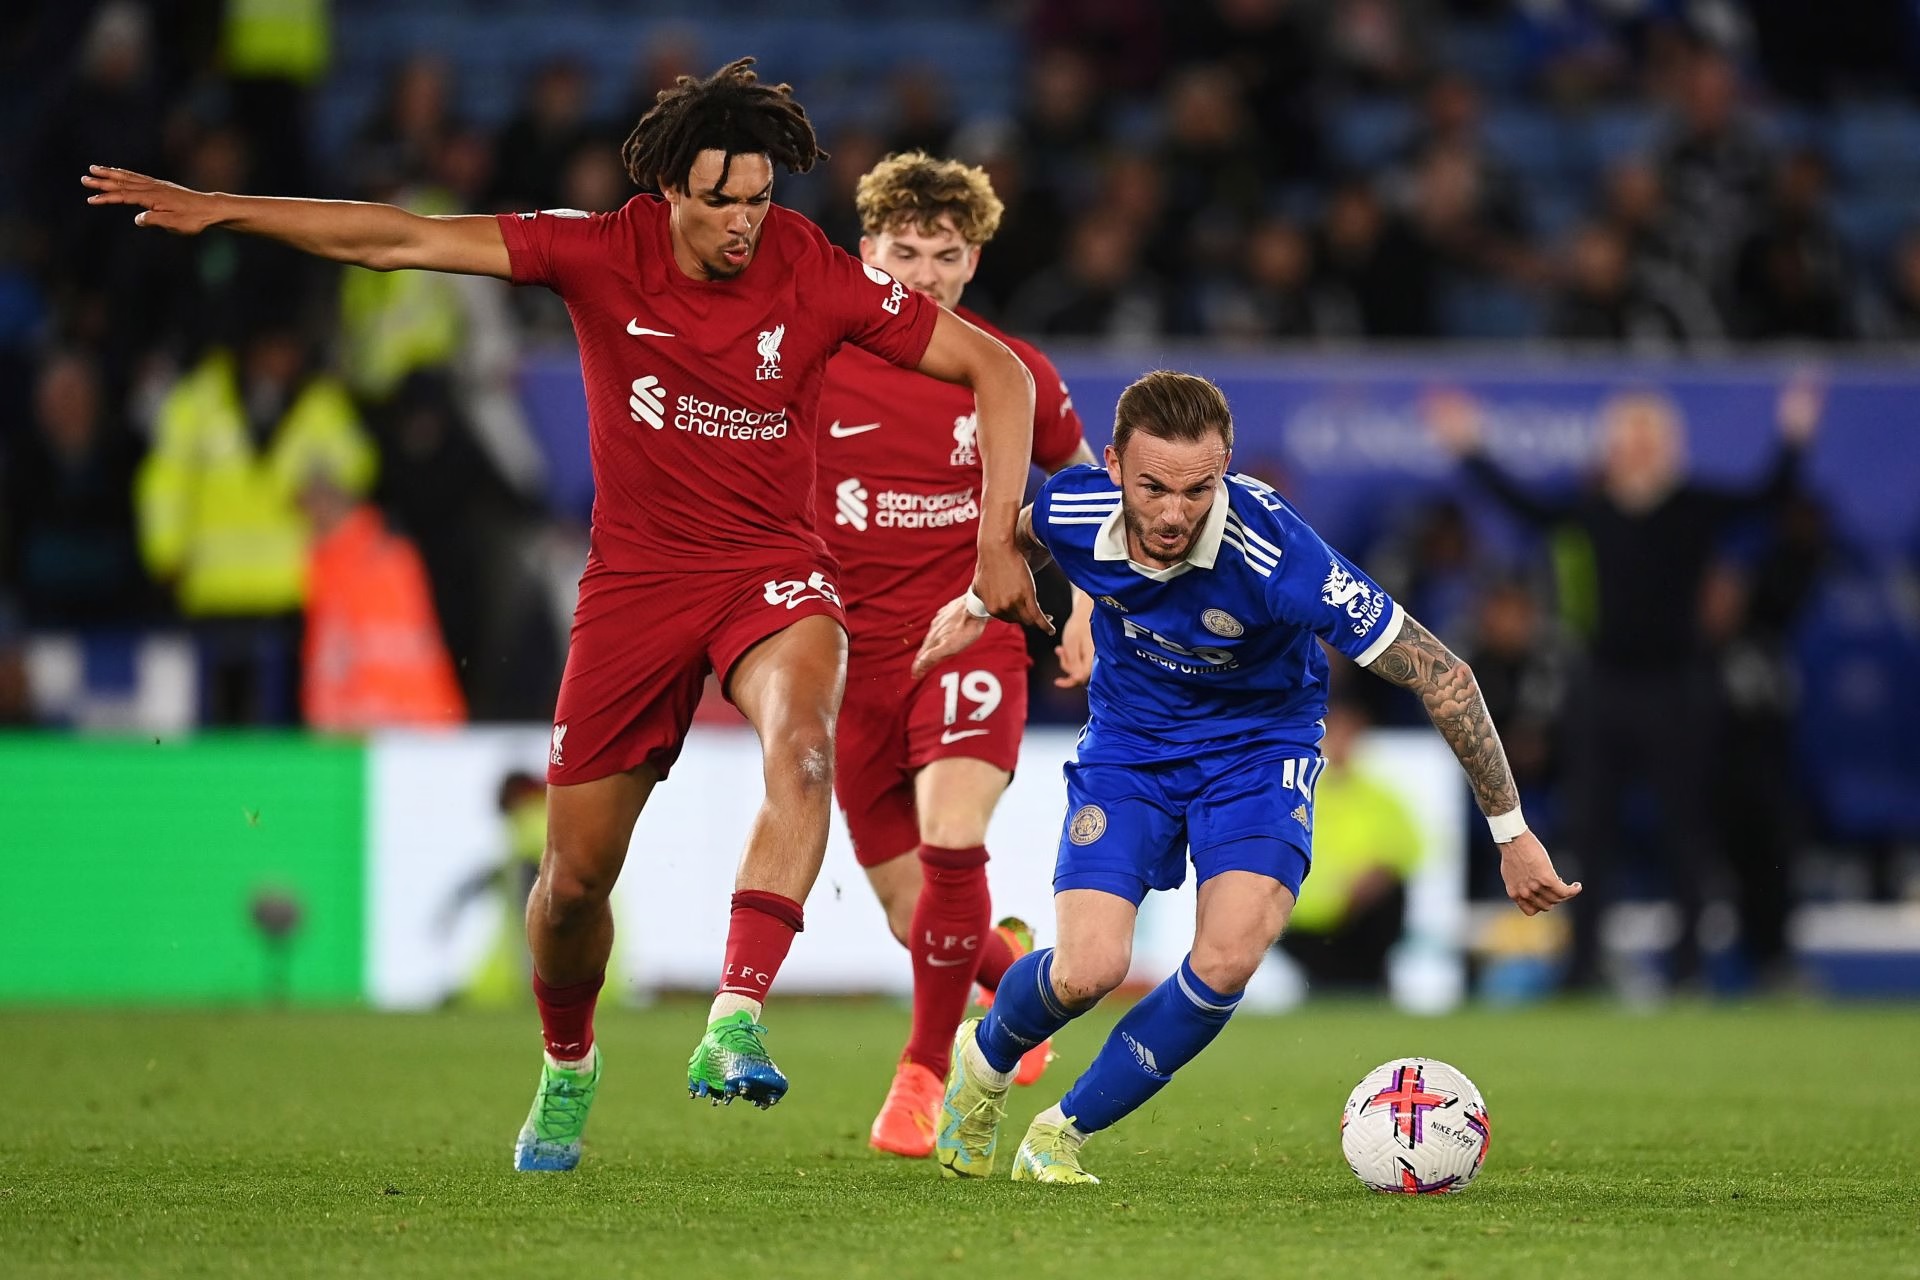 Leicester City on the brink of relegation after loss to Liverpool